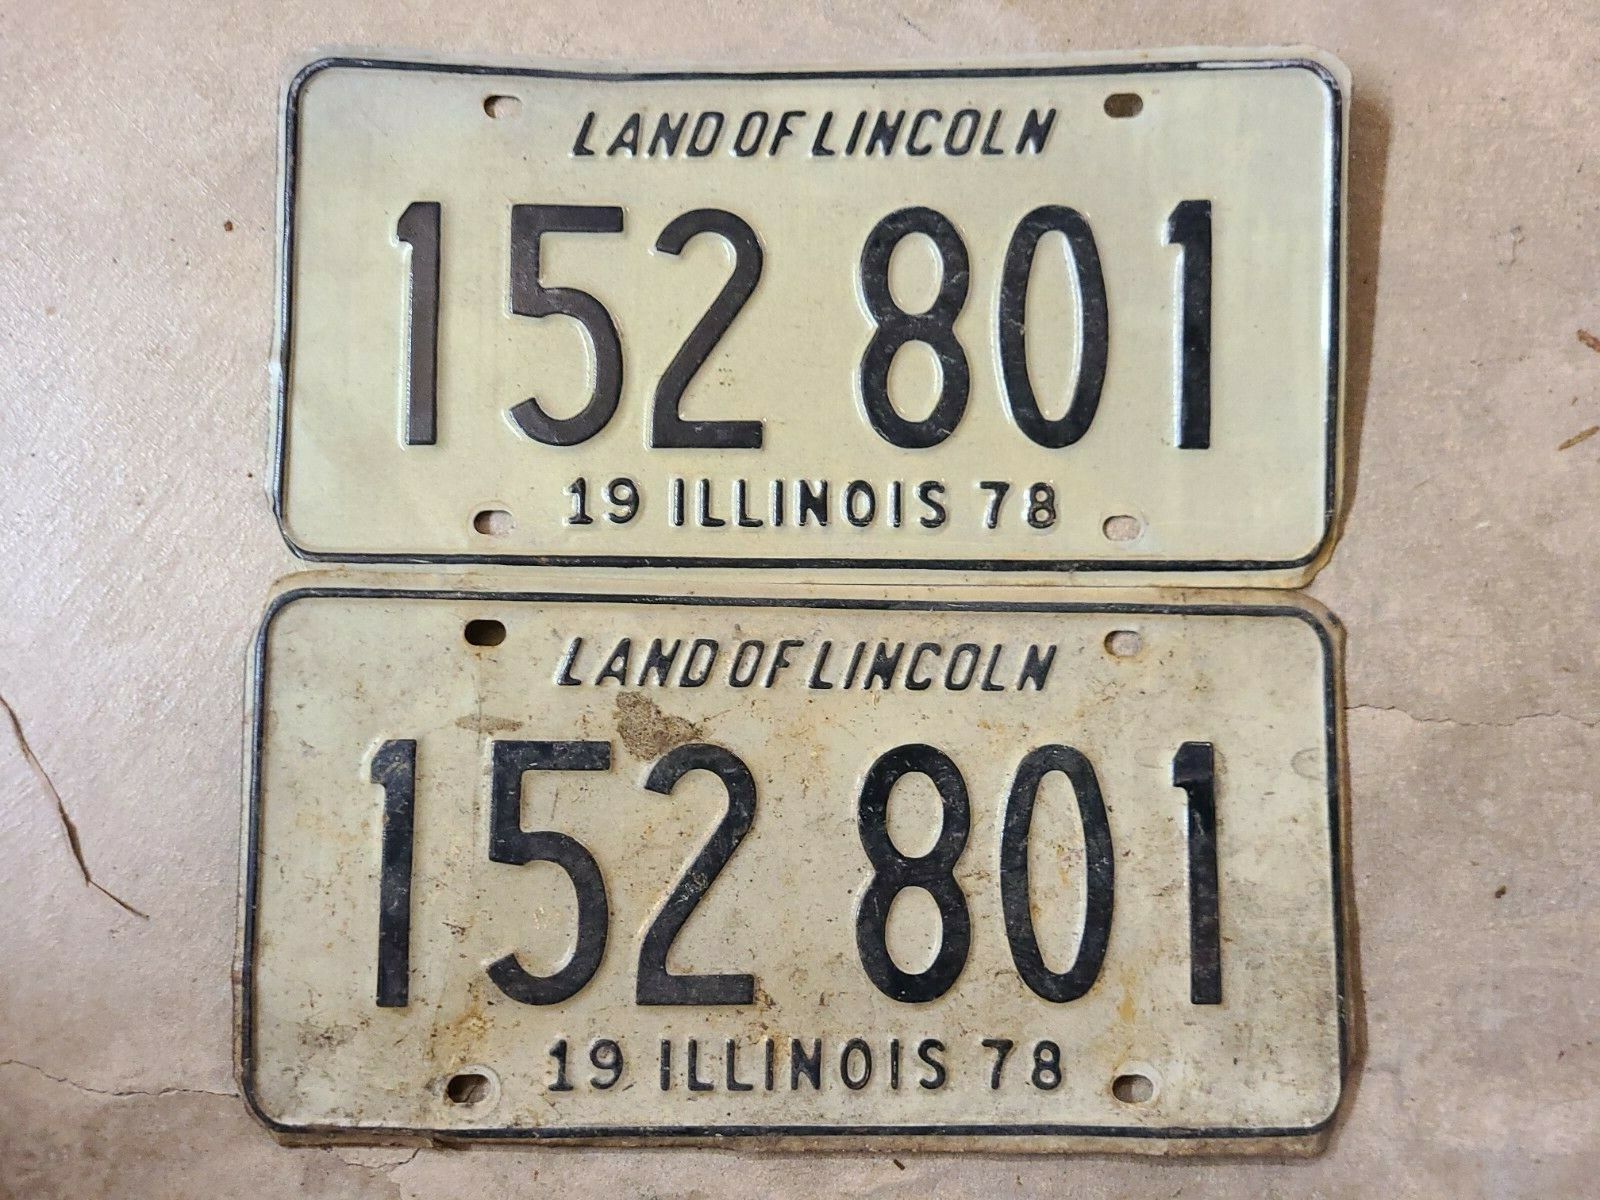 Vintage Illinois 1978 License Plates Matched Set - 152 801 - Pre-Owned